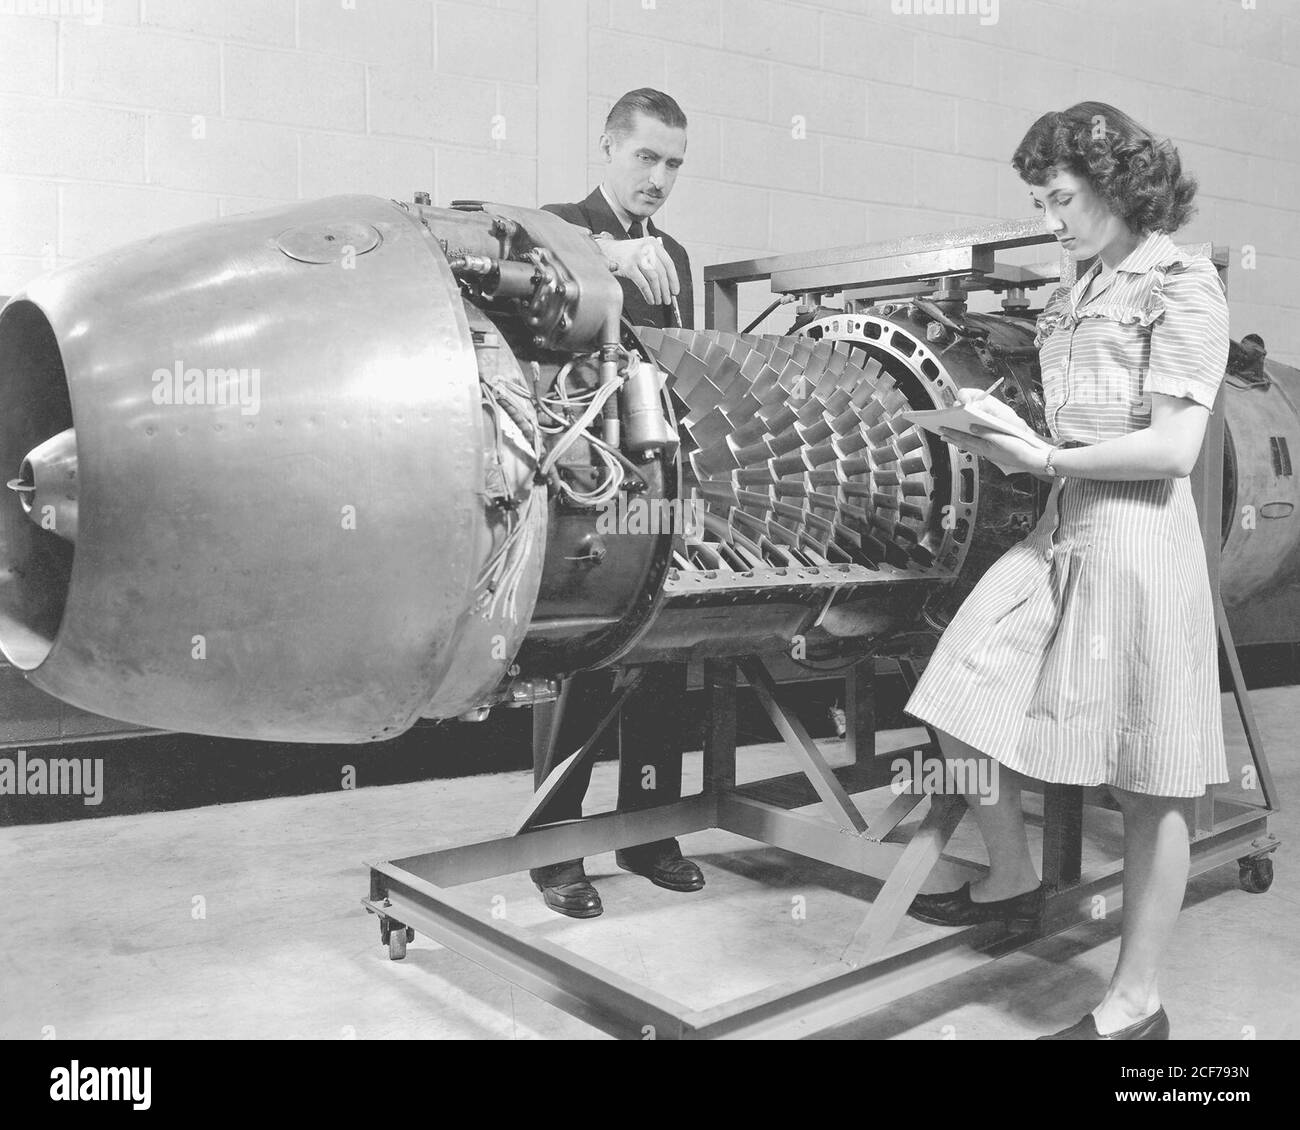 Exhibits for the Inspection by the Institute of Aeronautical Science Group-JUMO 004 Jet Propelled Engine with cover removed. Design variables and the arrangement of blades on the eight-stage axial flow compressor of a Junkers Jumo, 004, turbojet engine is shown being investigated at the Aircraft Engine Research Laboratory of the National Advisory Committee for Aeronautics, Cleveland, Ohio, now known as John H. Glenn Research Center at Lewis Field. Stock Photo